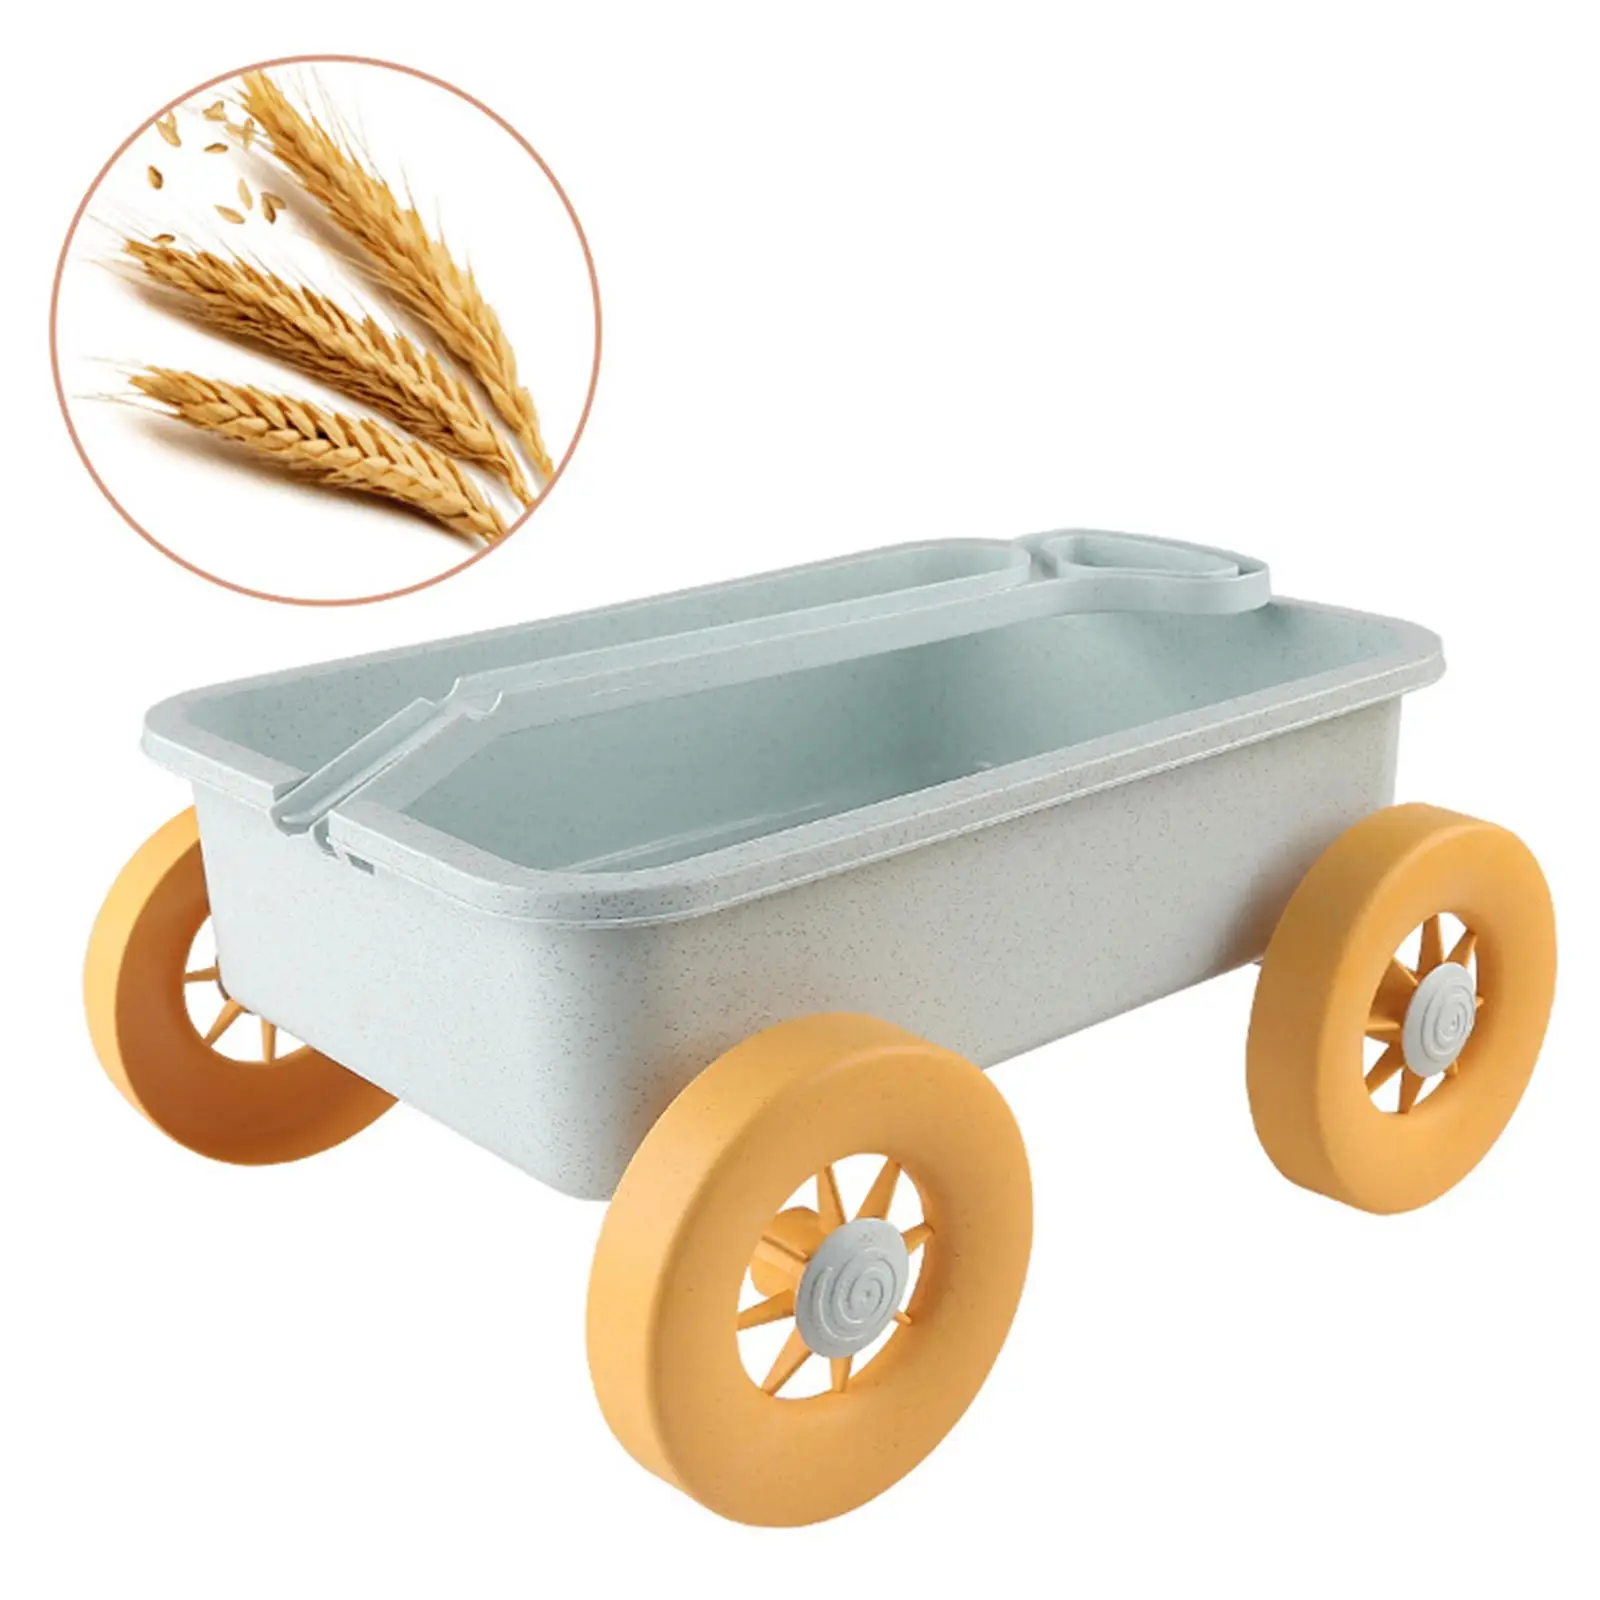 Small Wagon Toy Motor Vehicles Garden Wagon Tools Toy for Holding Small Toys